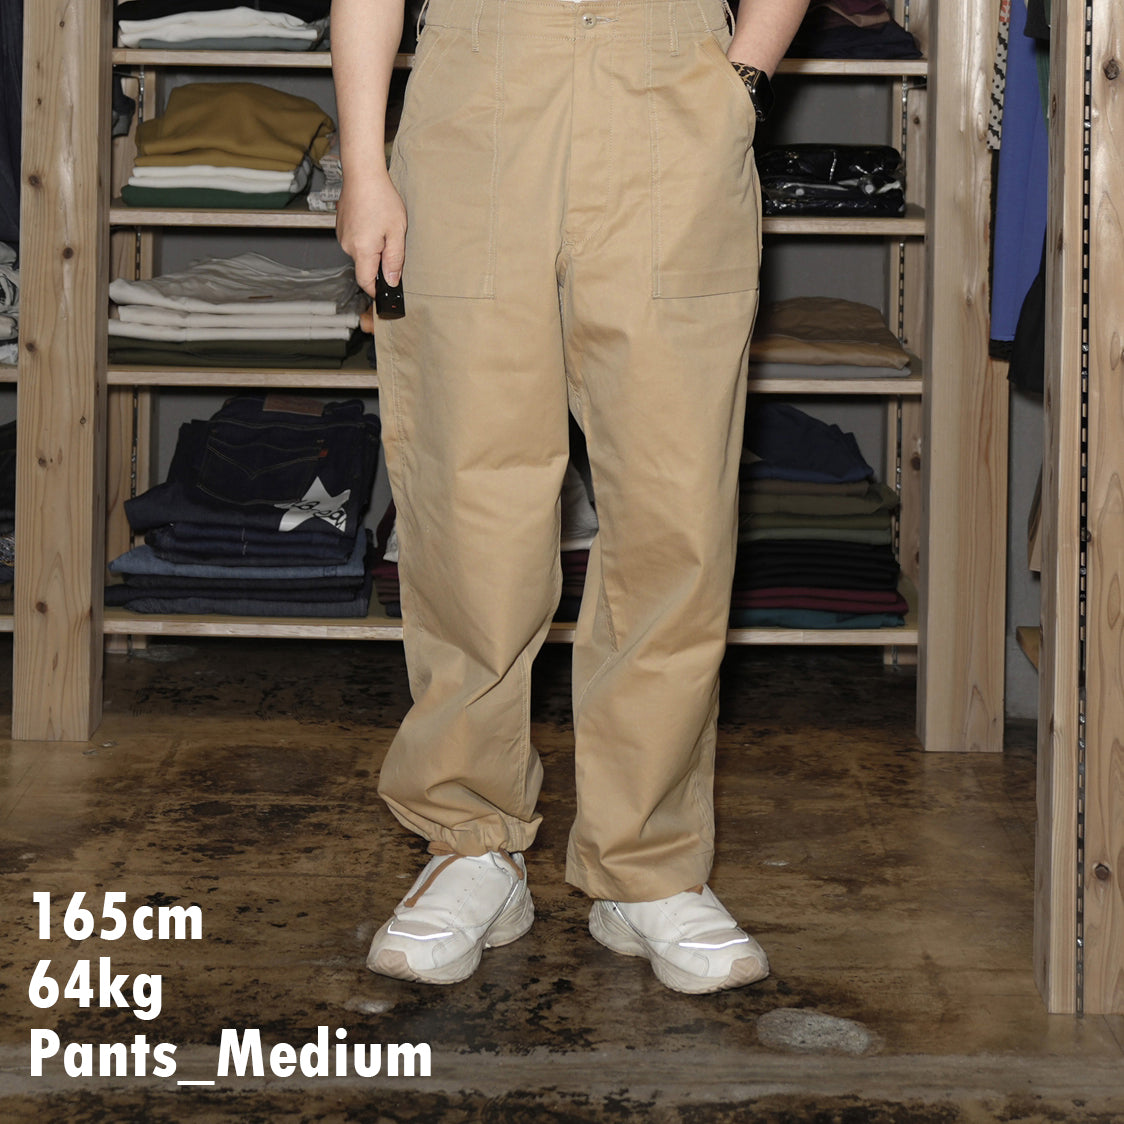 Name:1951 BAKER | Color:IRIDESCENT BEIGE | Size:M/L【CITYLIGHTS PRODUCTS_シティライツプロダクツ】